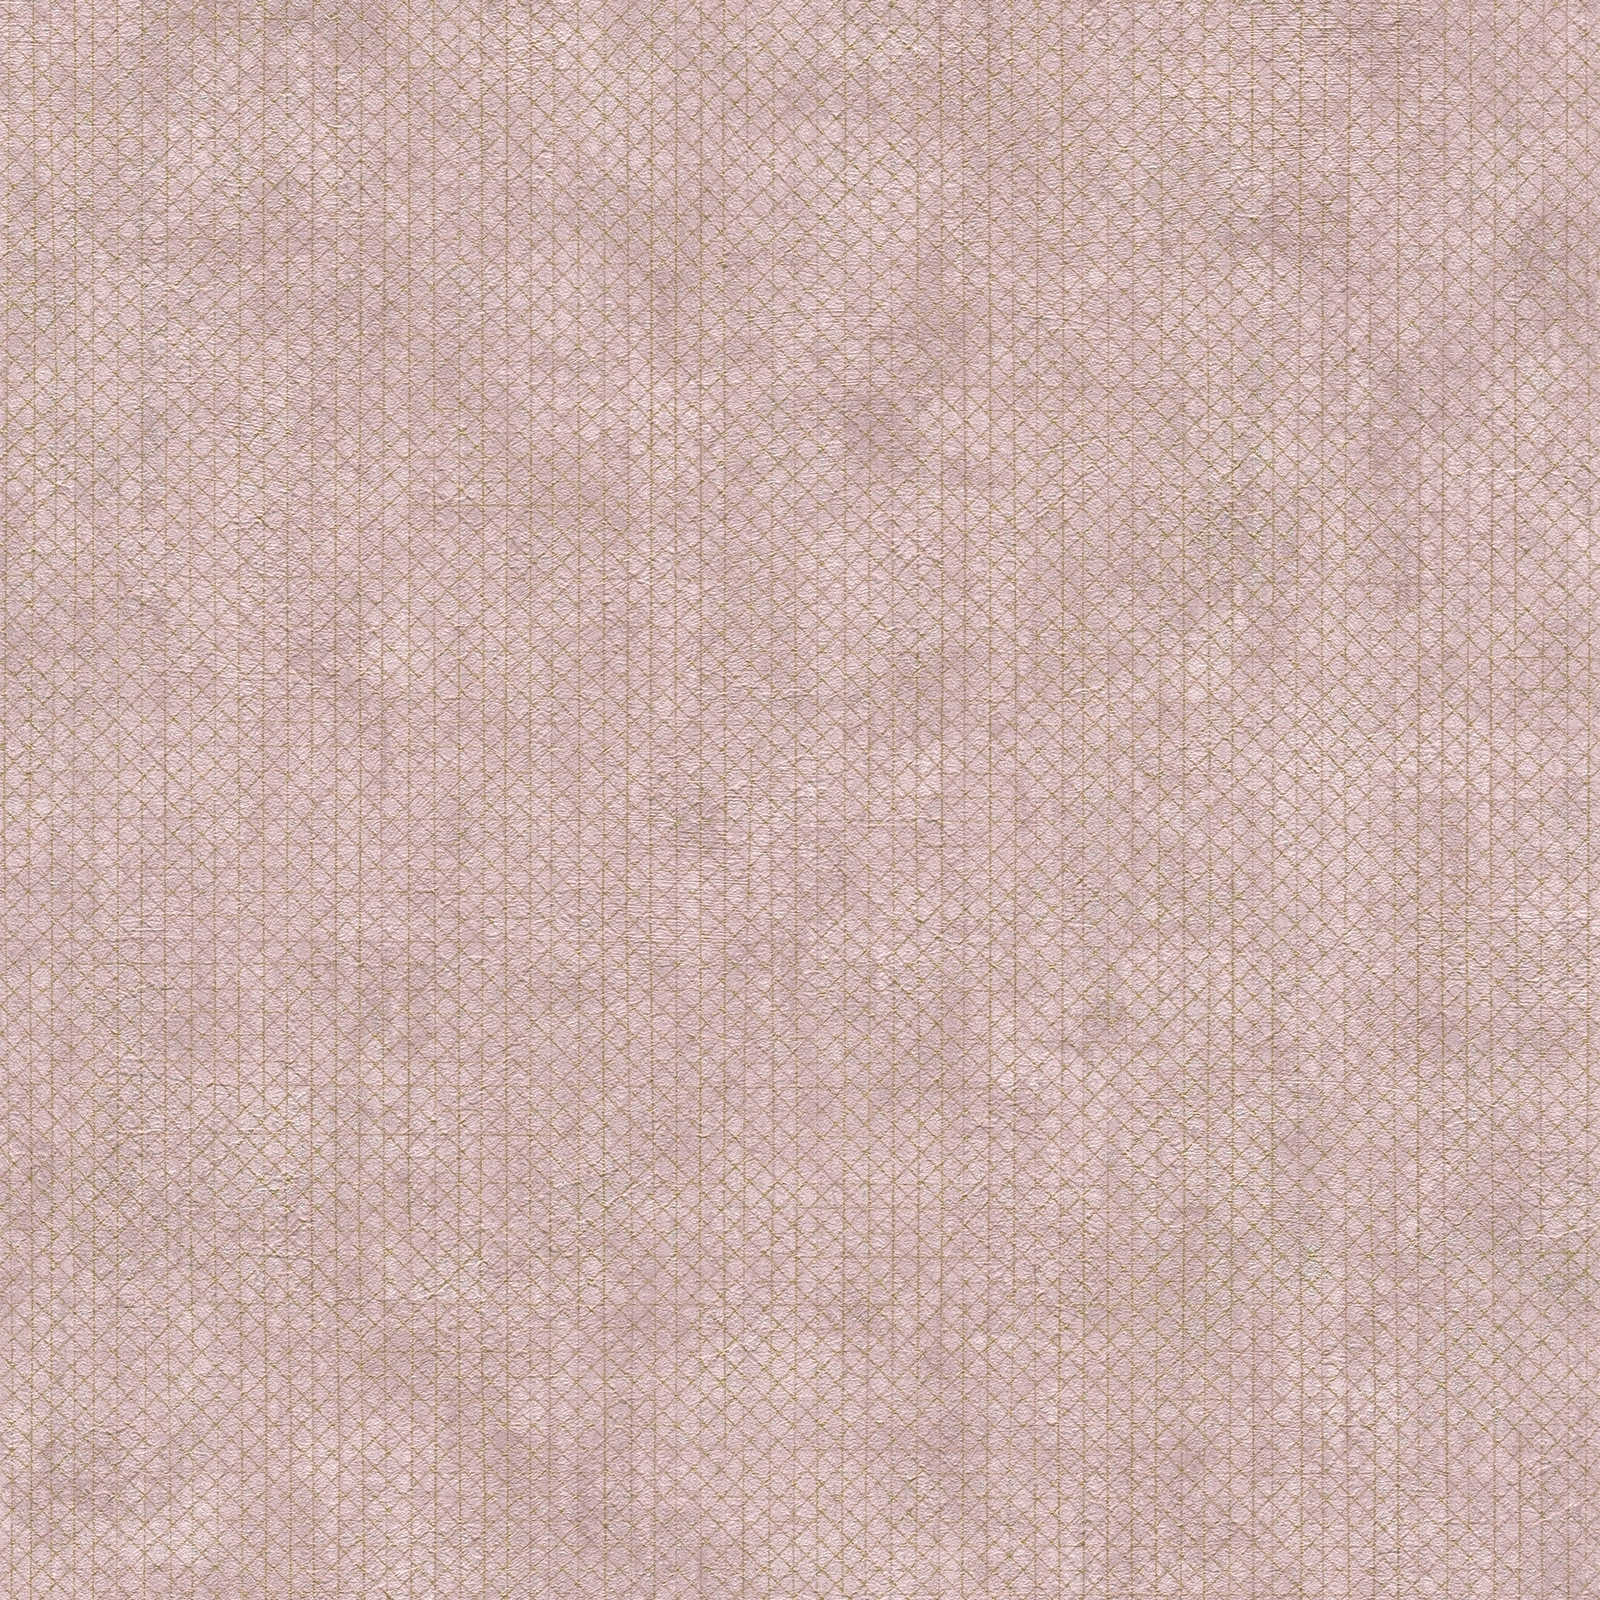 The Bos - Mottled Metallic Lines bold wallpaper AS Creation Roll Pink  388263